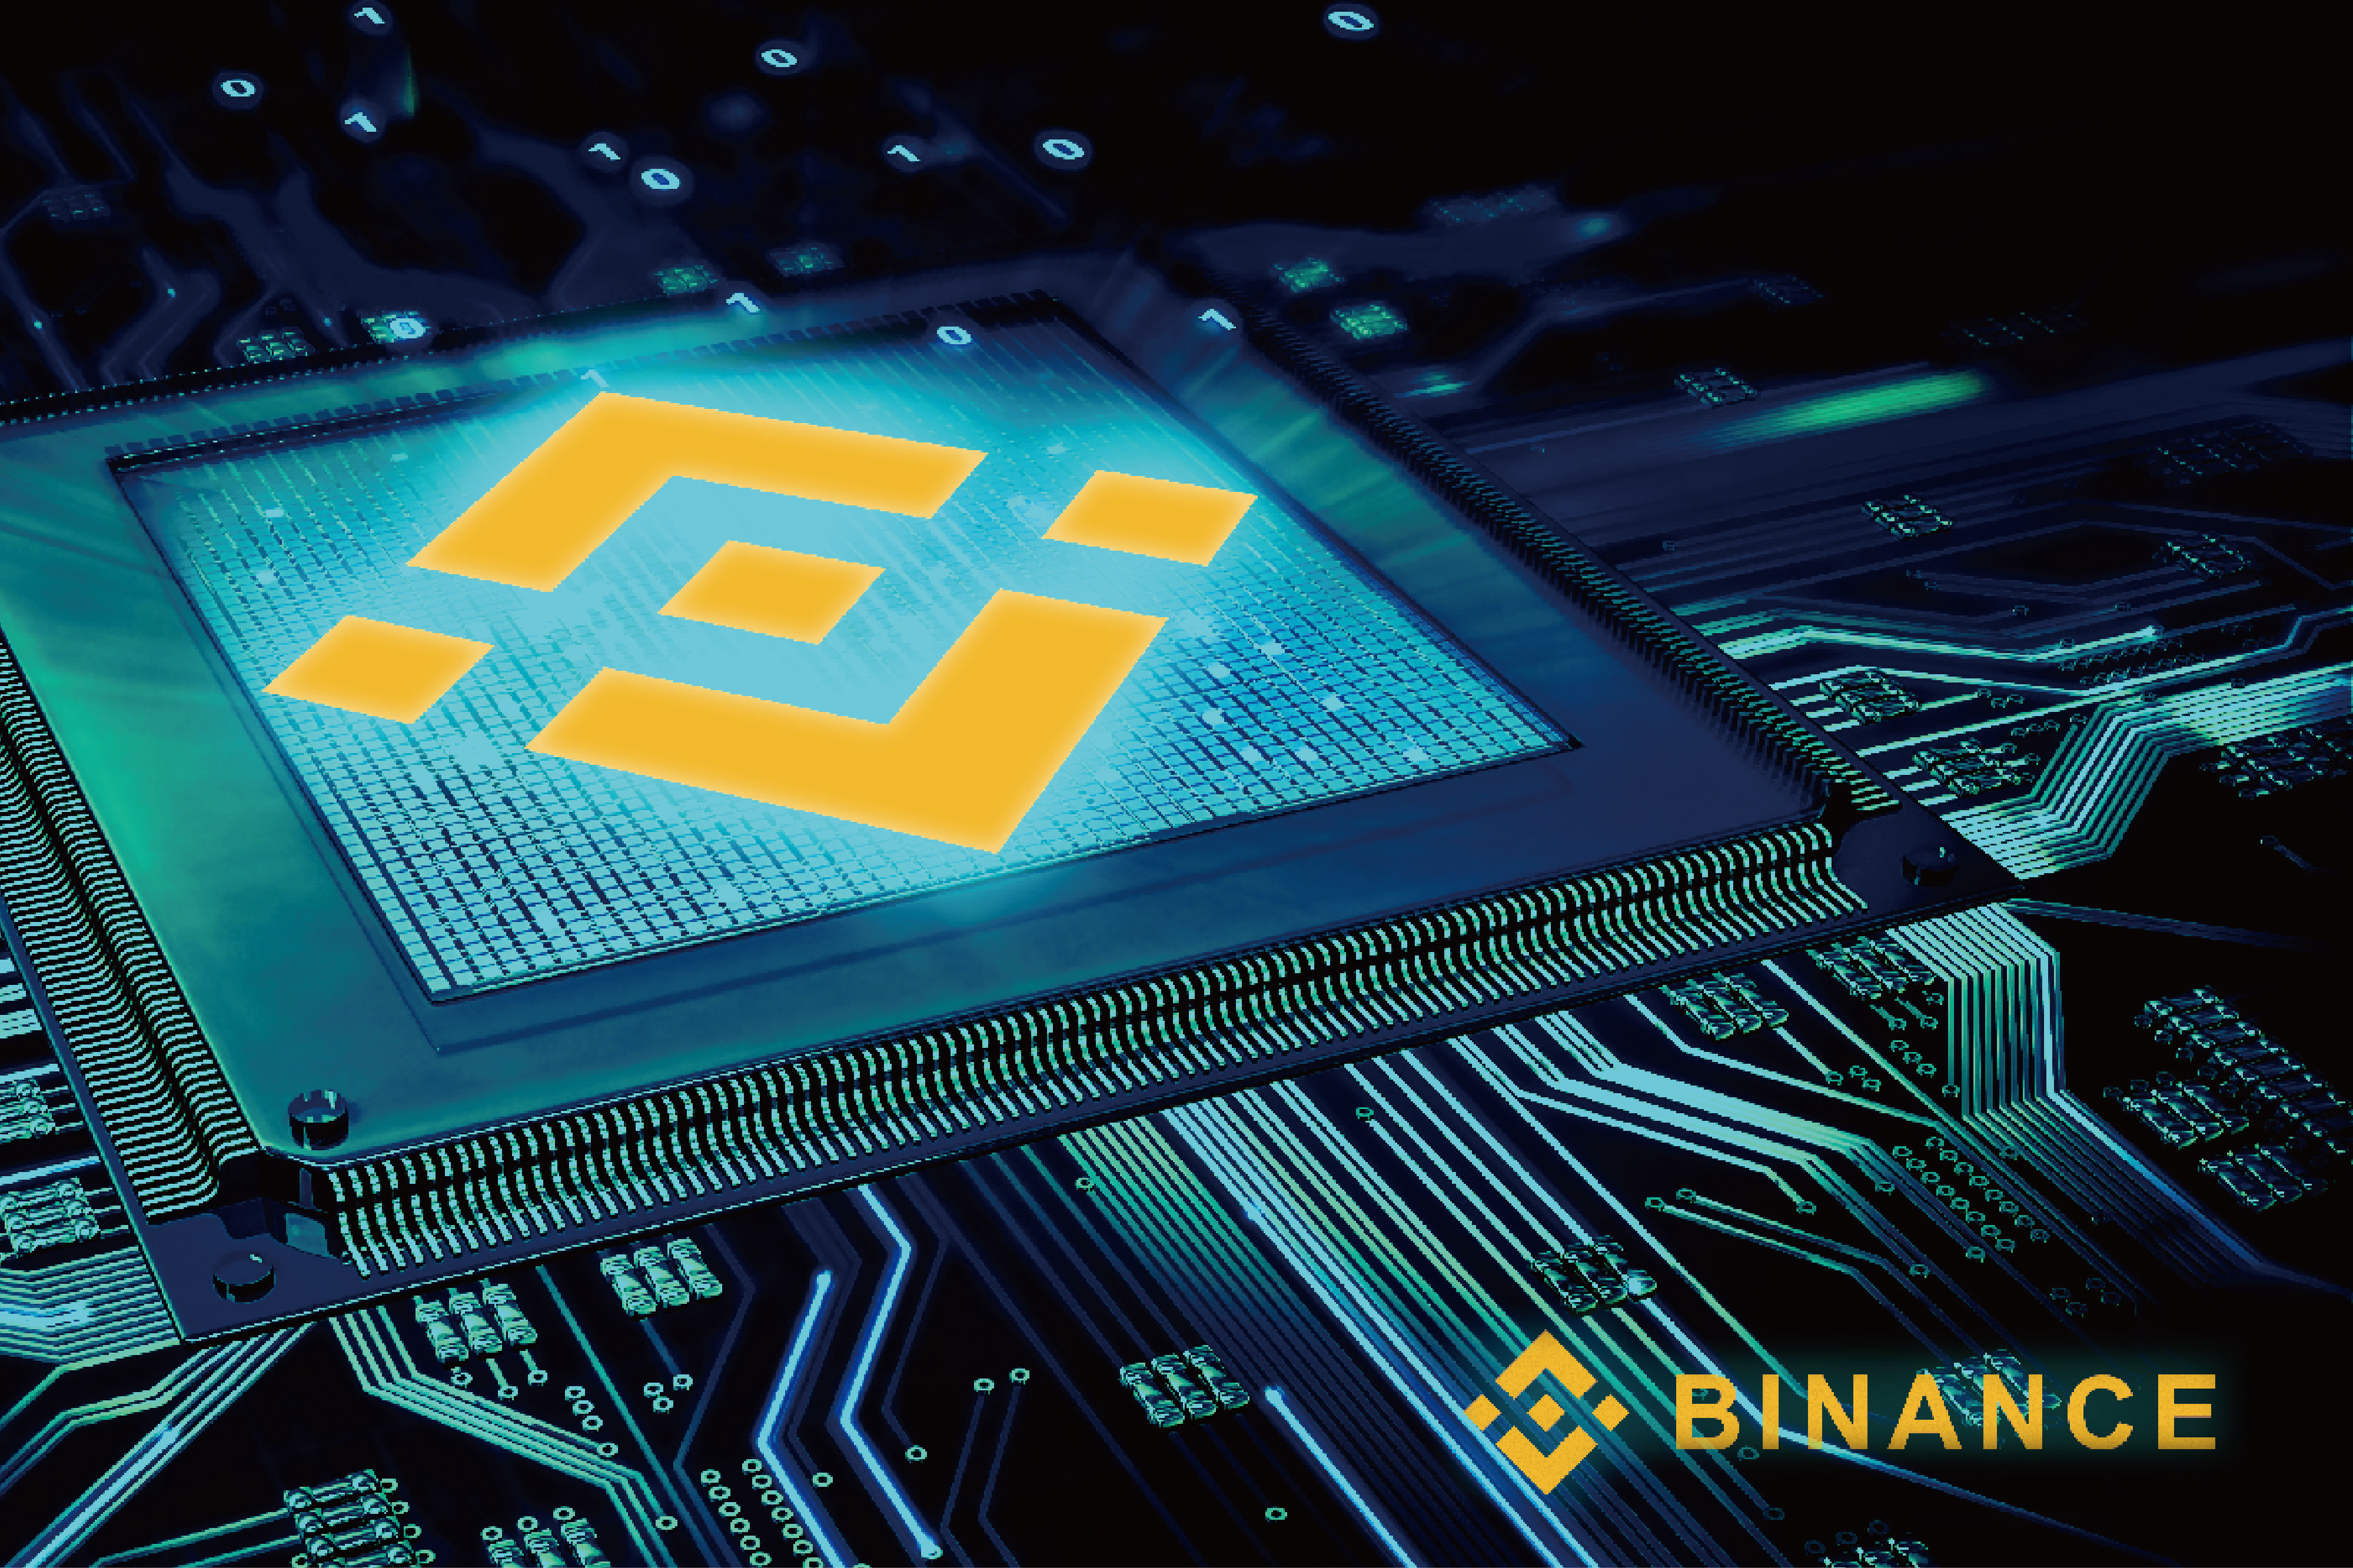 Binance Exchange Review [May 2020] - Is it a Safe? The ...